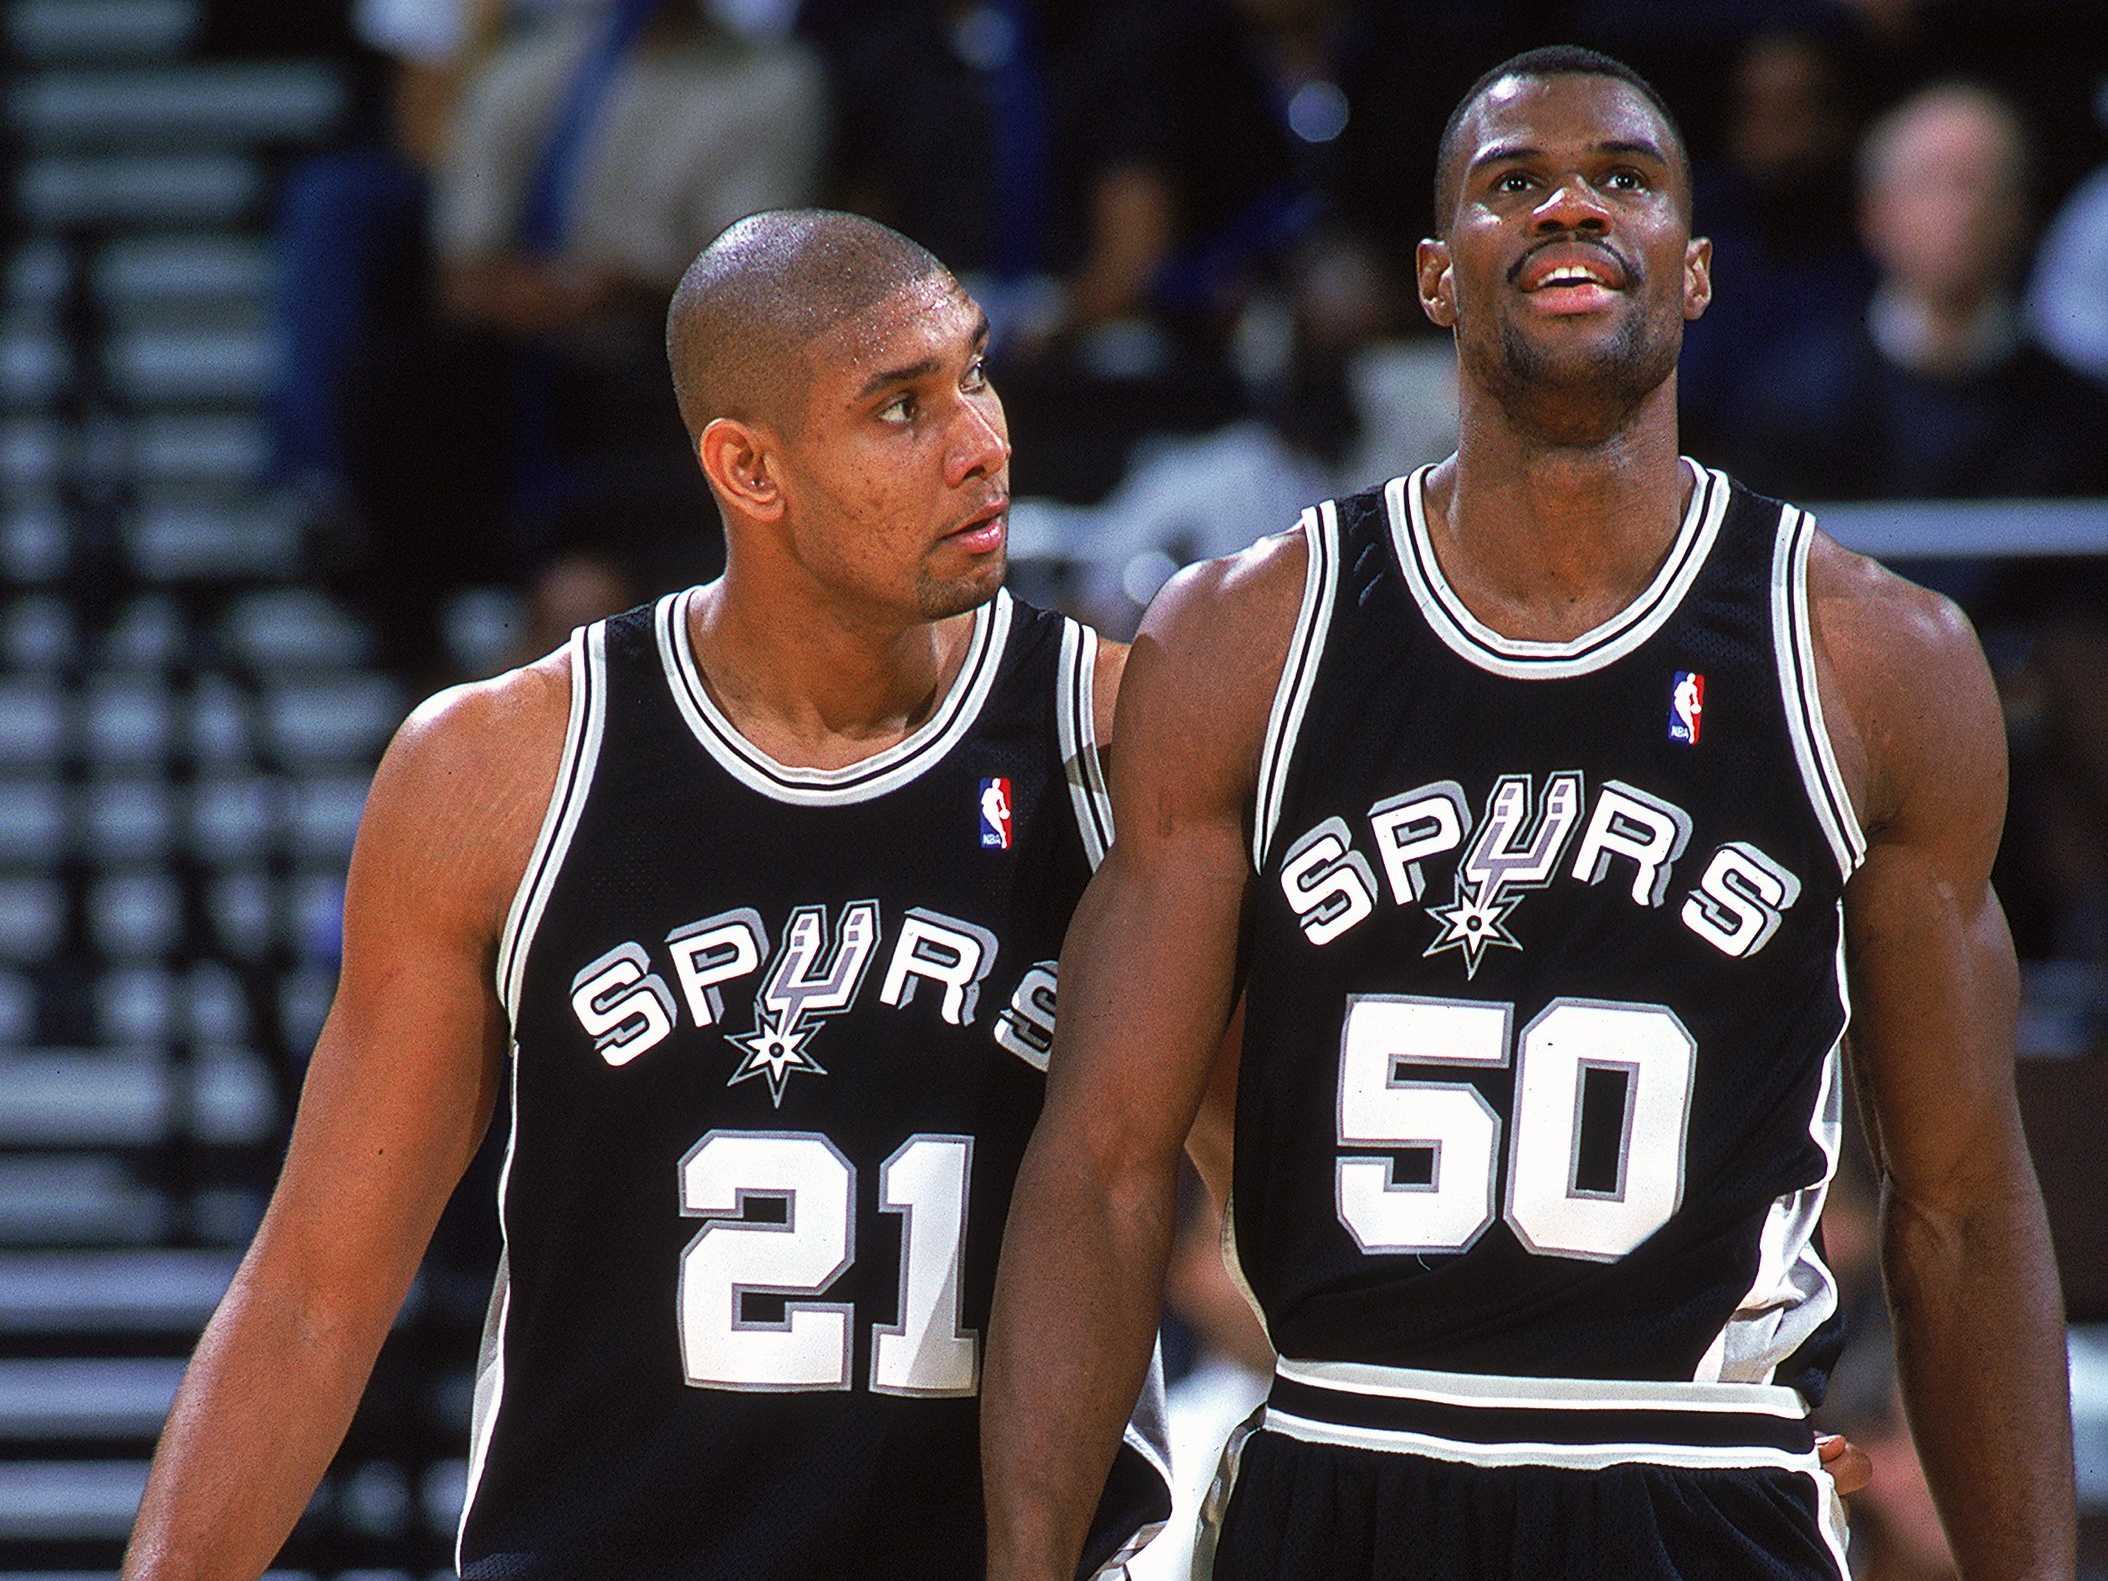 VINTAGE NBA en Twitter: "Tim Duncan and David Robinson AKA the Twin Towers were the frontcourt court duo of the San Antonio Spurs from 1997–2003 winning two titles. https://t.co/fbRd5MjcZs" / X